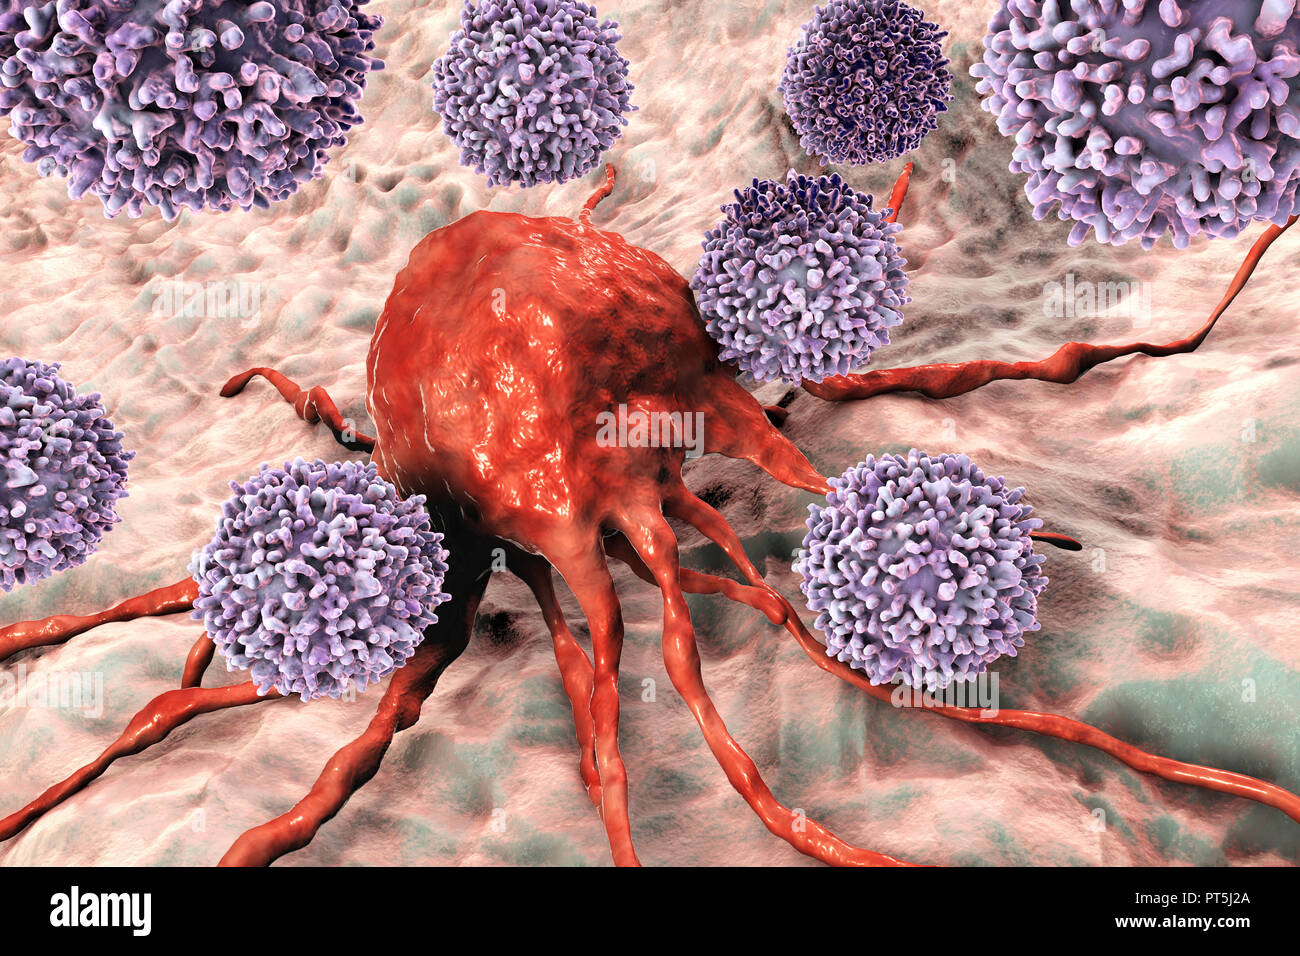 T lymphocyte cells attacking a cancer cell, computer illustration. T lymphocytes are a type of white blood cell that recognise a specific site (antigen) on the surface of cancer cells or pathogens and bind to it. Some T lymphocytes then signal for other immune system cells to eliminate the cell. The genetic changes that cause a cell to become cancerous lead to the presentation of tumour antigens on the cell's surface. Stock Photo